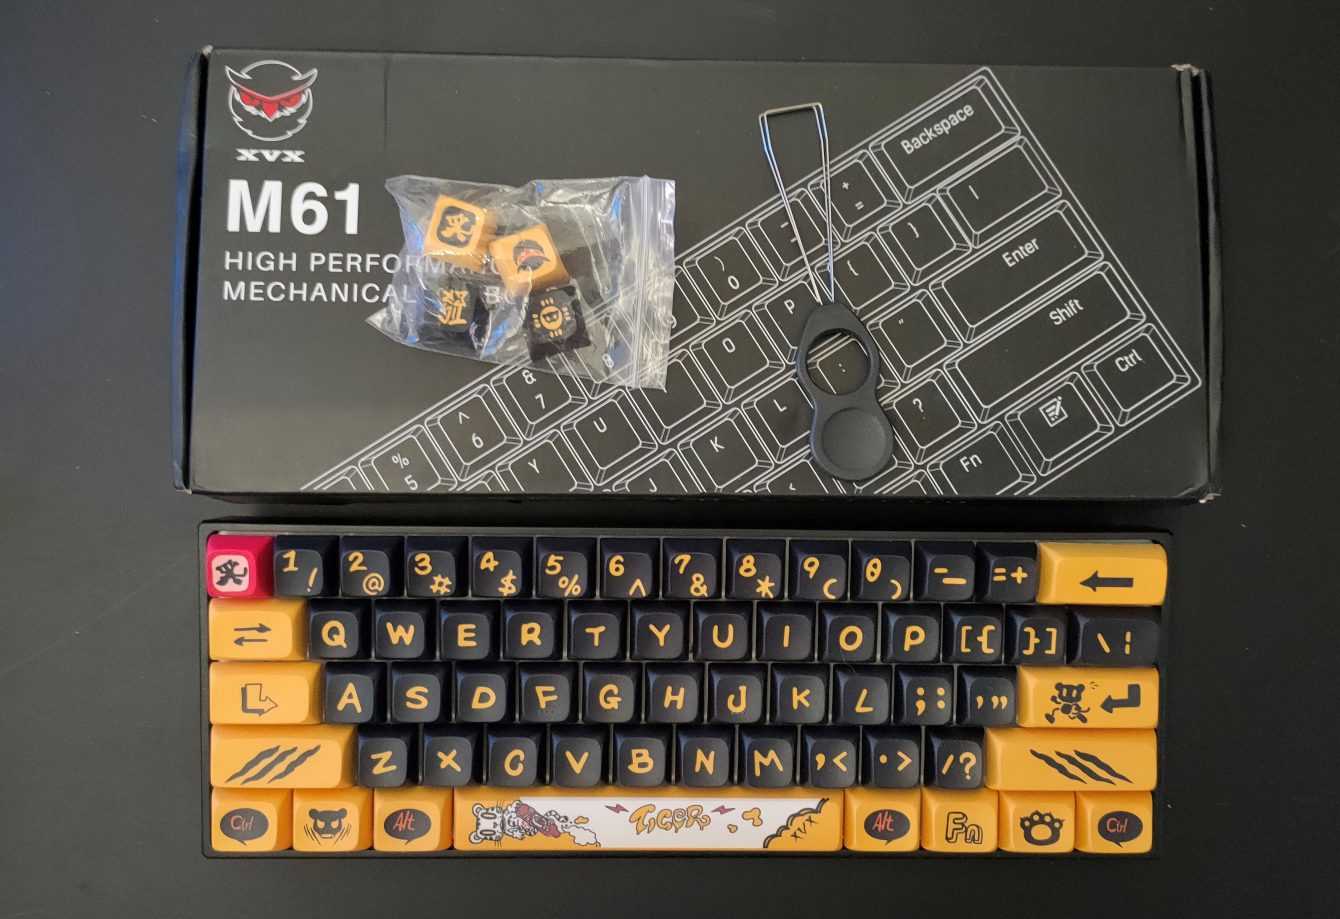 Hkfos XVX M61 Tiger review: the best keyboard 60%?